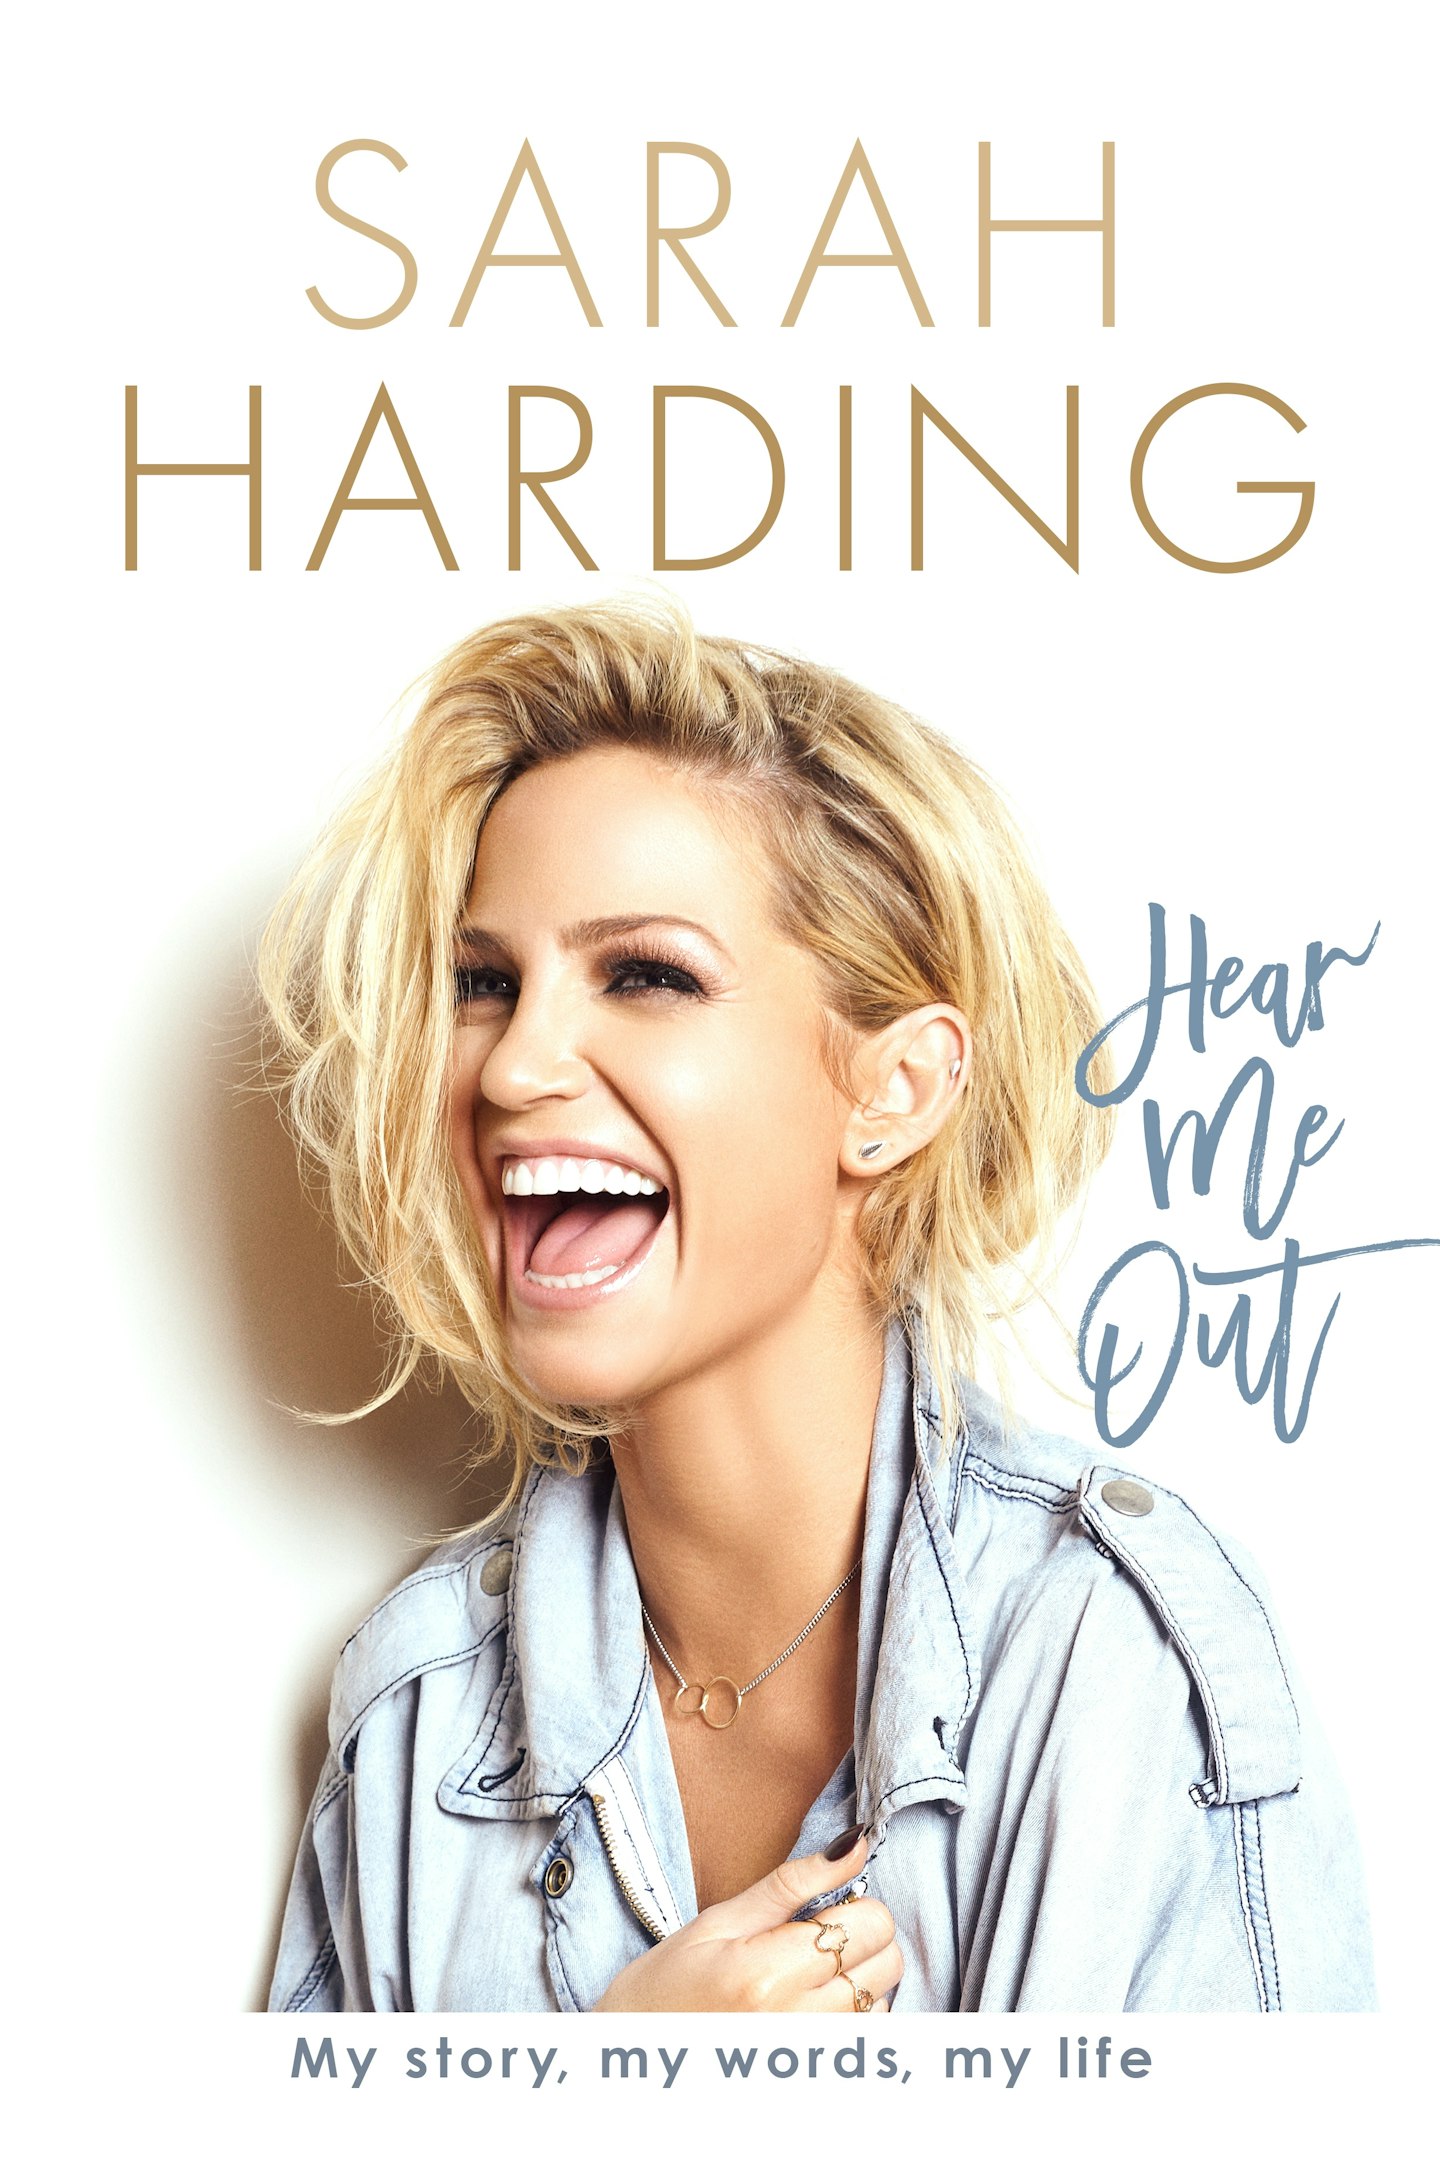 Sarah Harding fans chart Girls Aloud song Hear Me Out in honour of the release of her autobiography amid breast cancer battle